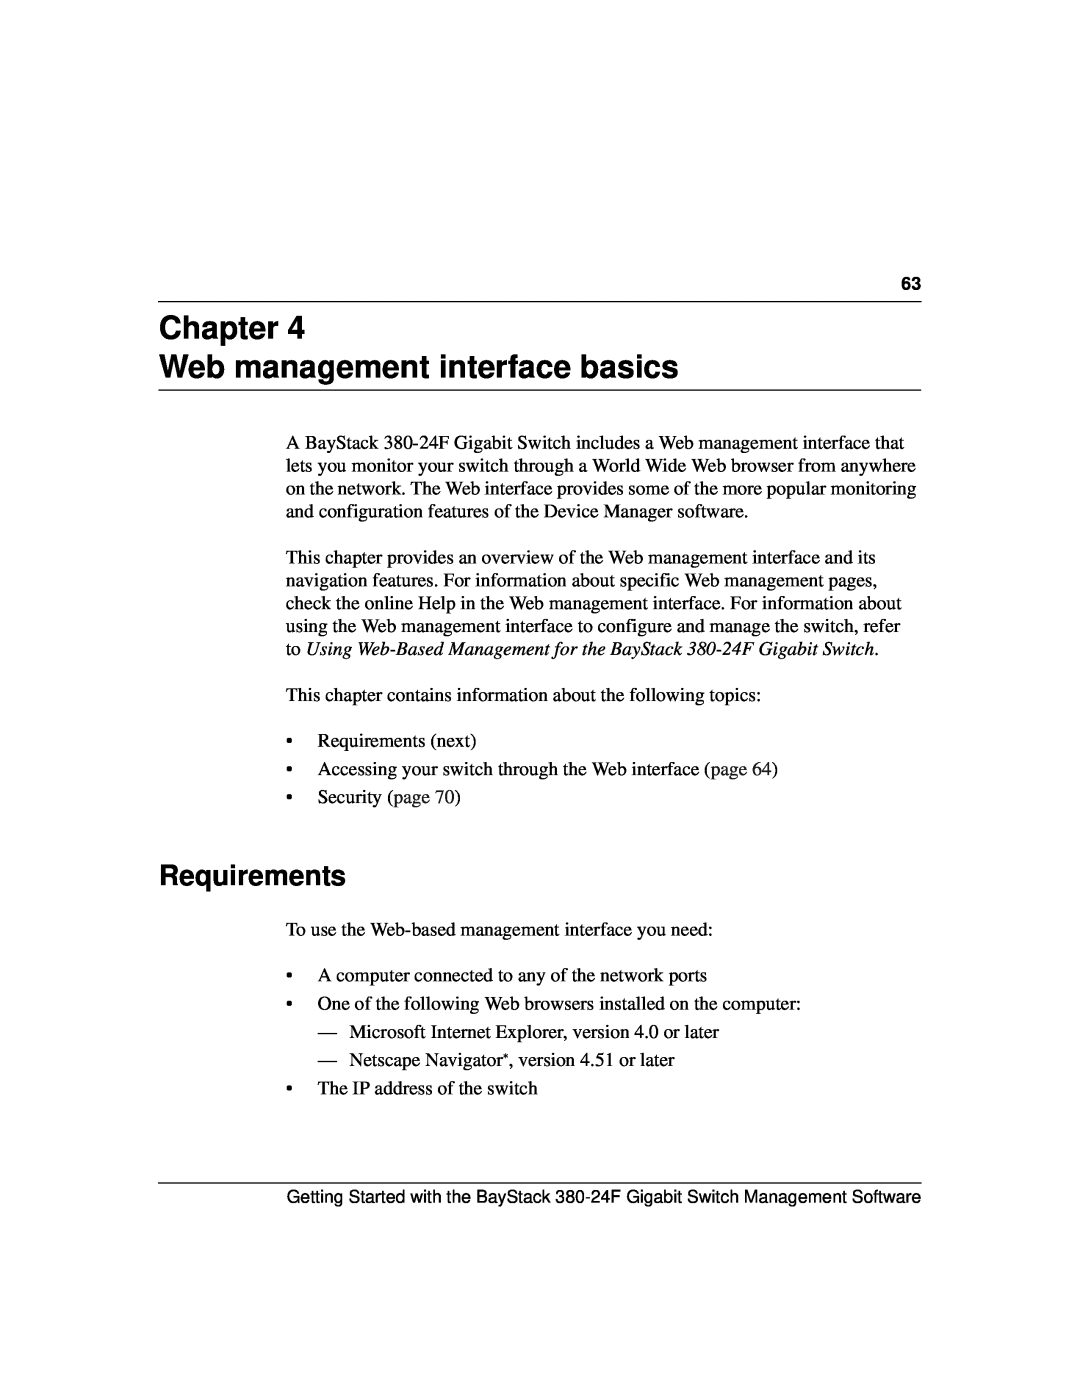 Nortel Networks 380-24F manual Chapter Web management interface basics, Requirements 